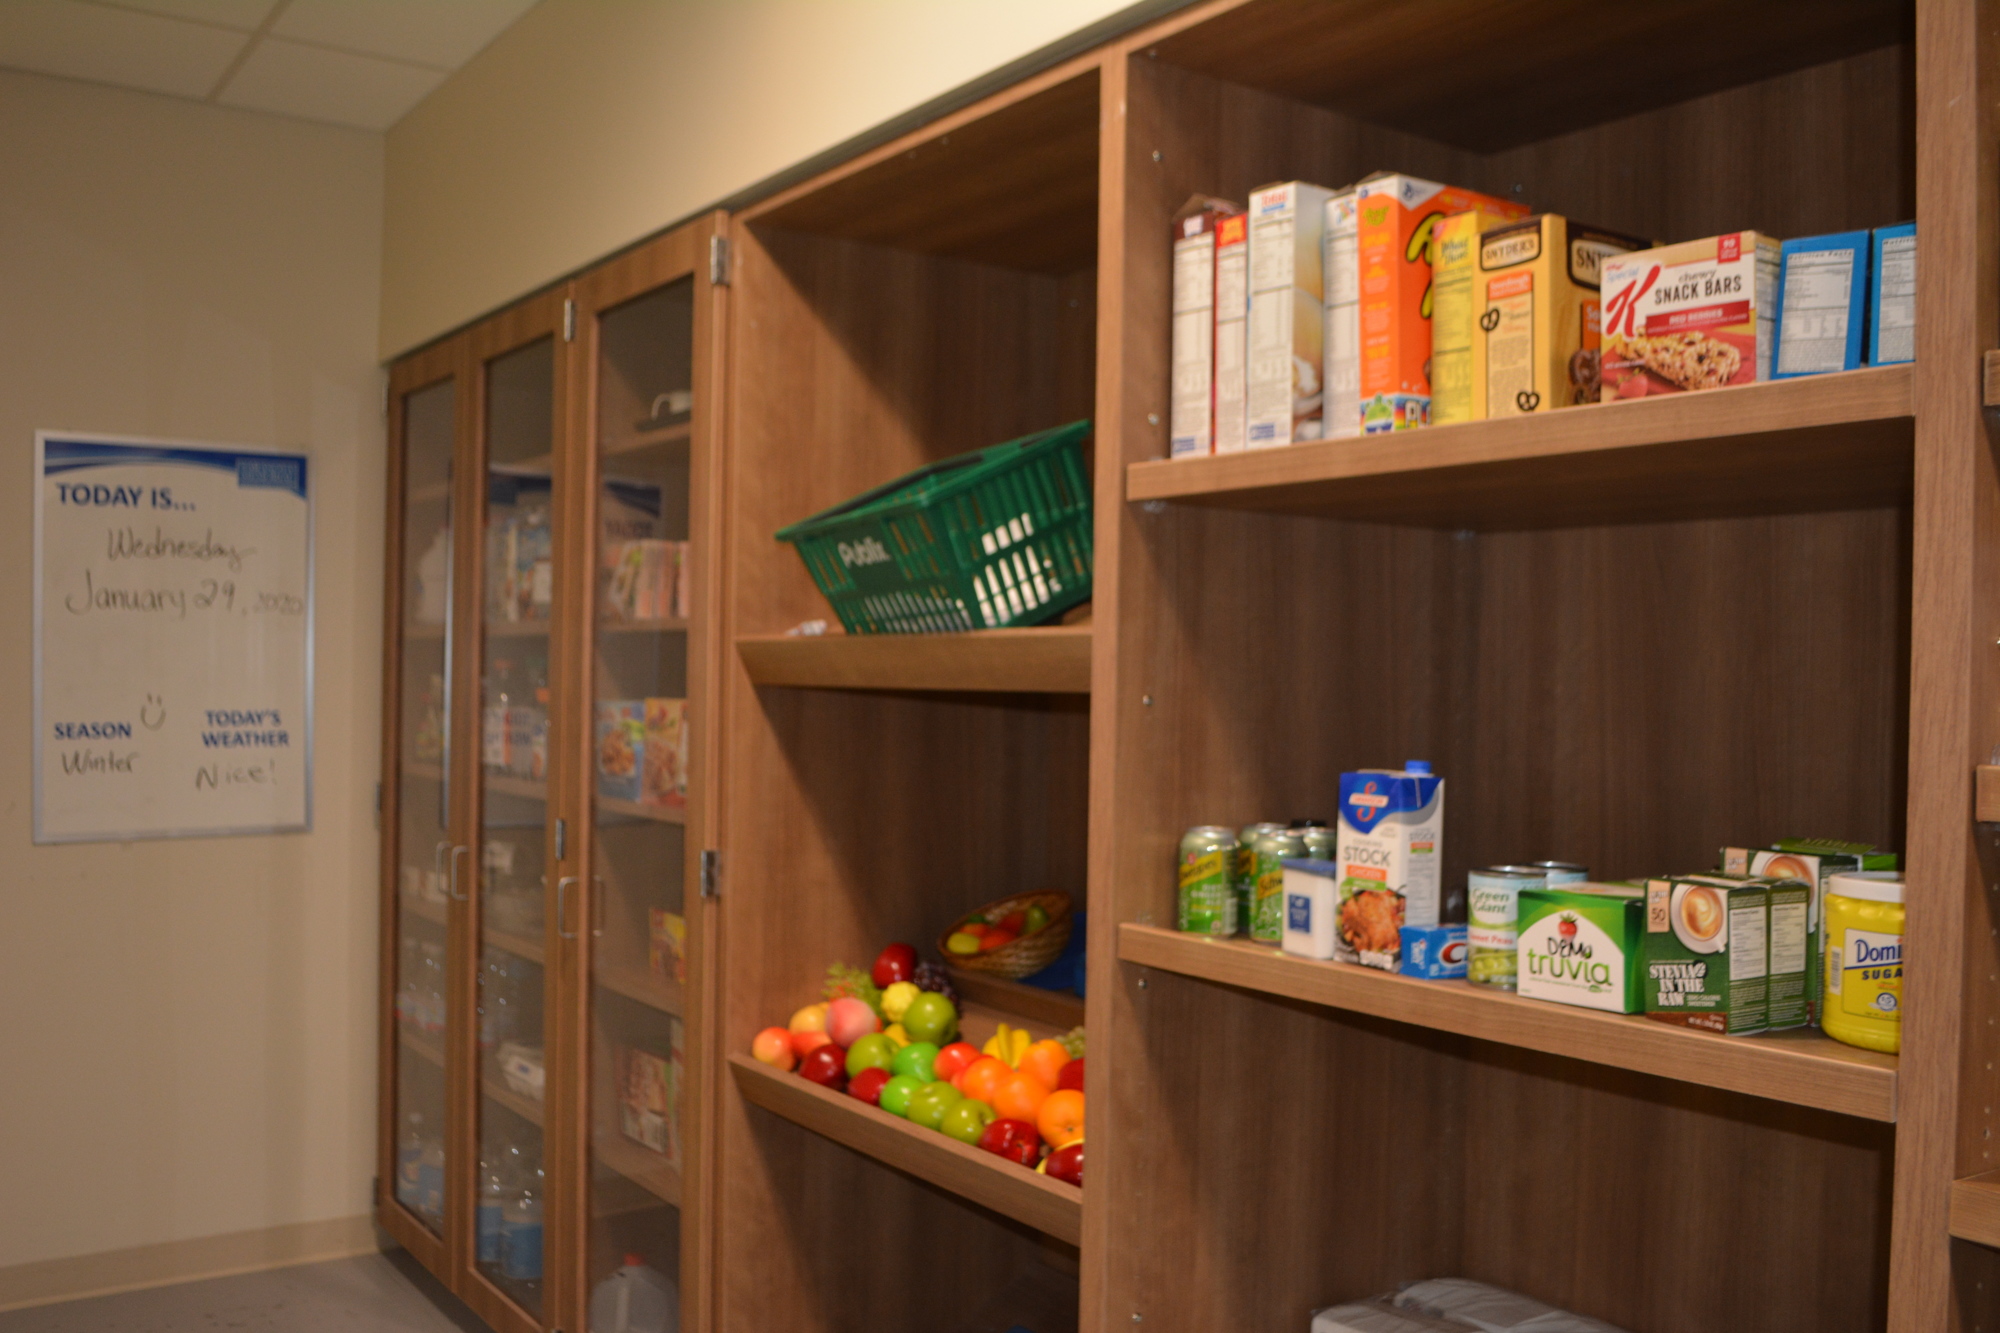 The Rehabilitation Pavilion features a grocery aisle where patients can practice grabbing items from shelves with different heights. The groceries can then be used to cook in each patient's apartment's kitchen.